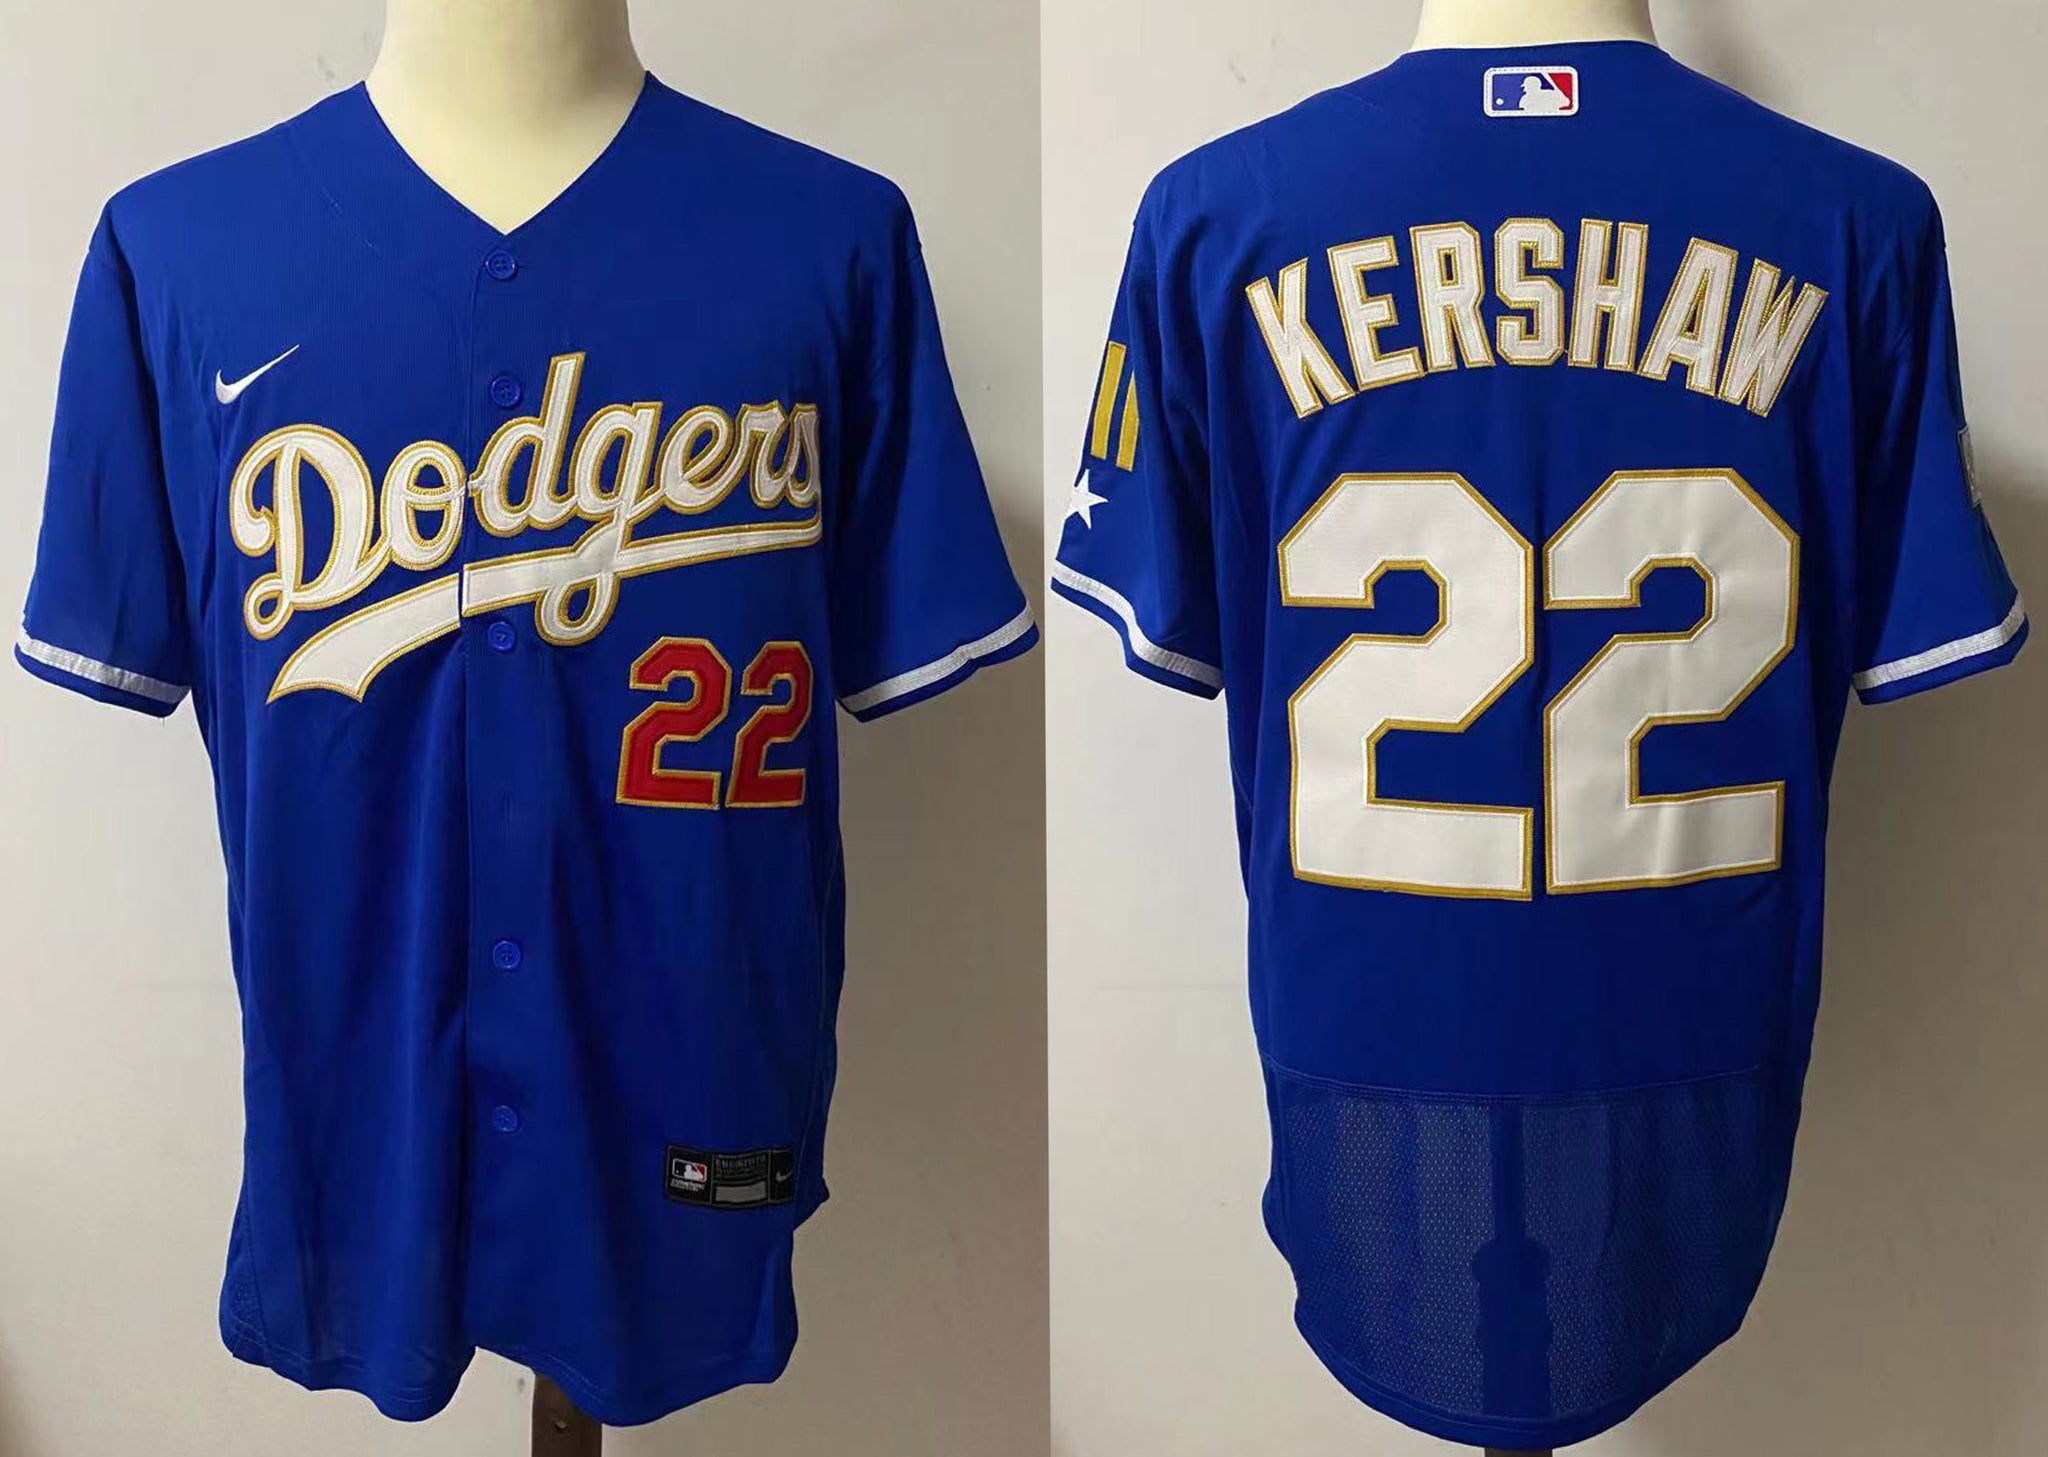 Clayton Kershaw Autographed Los Angeles Dodgers Jersey